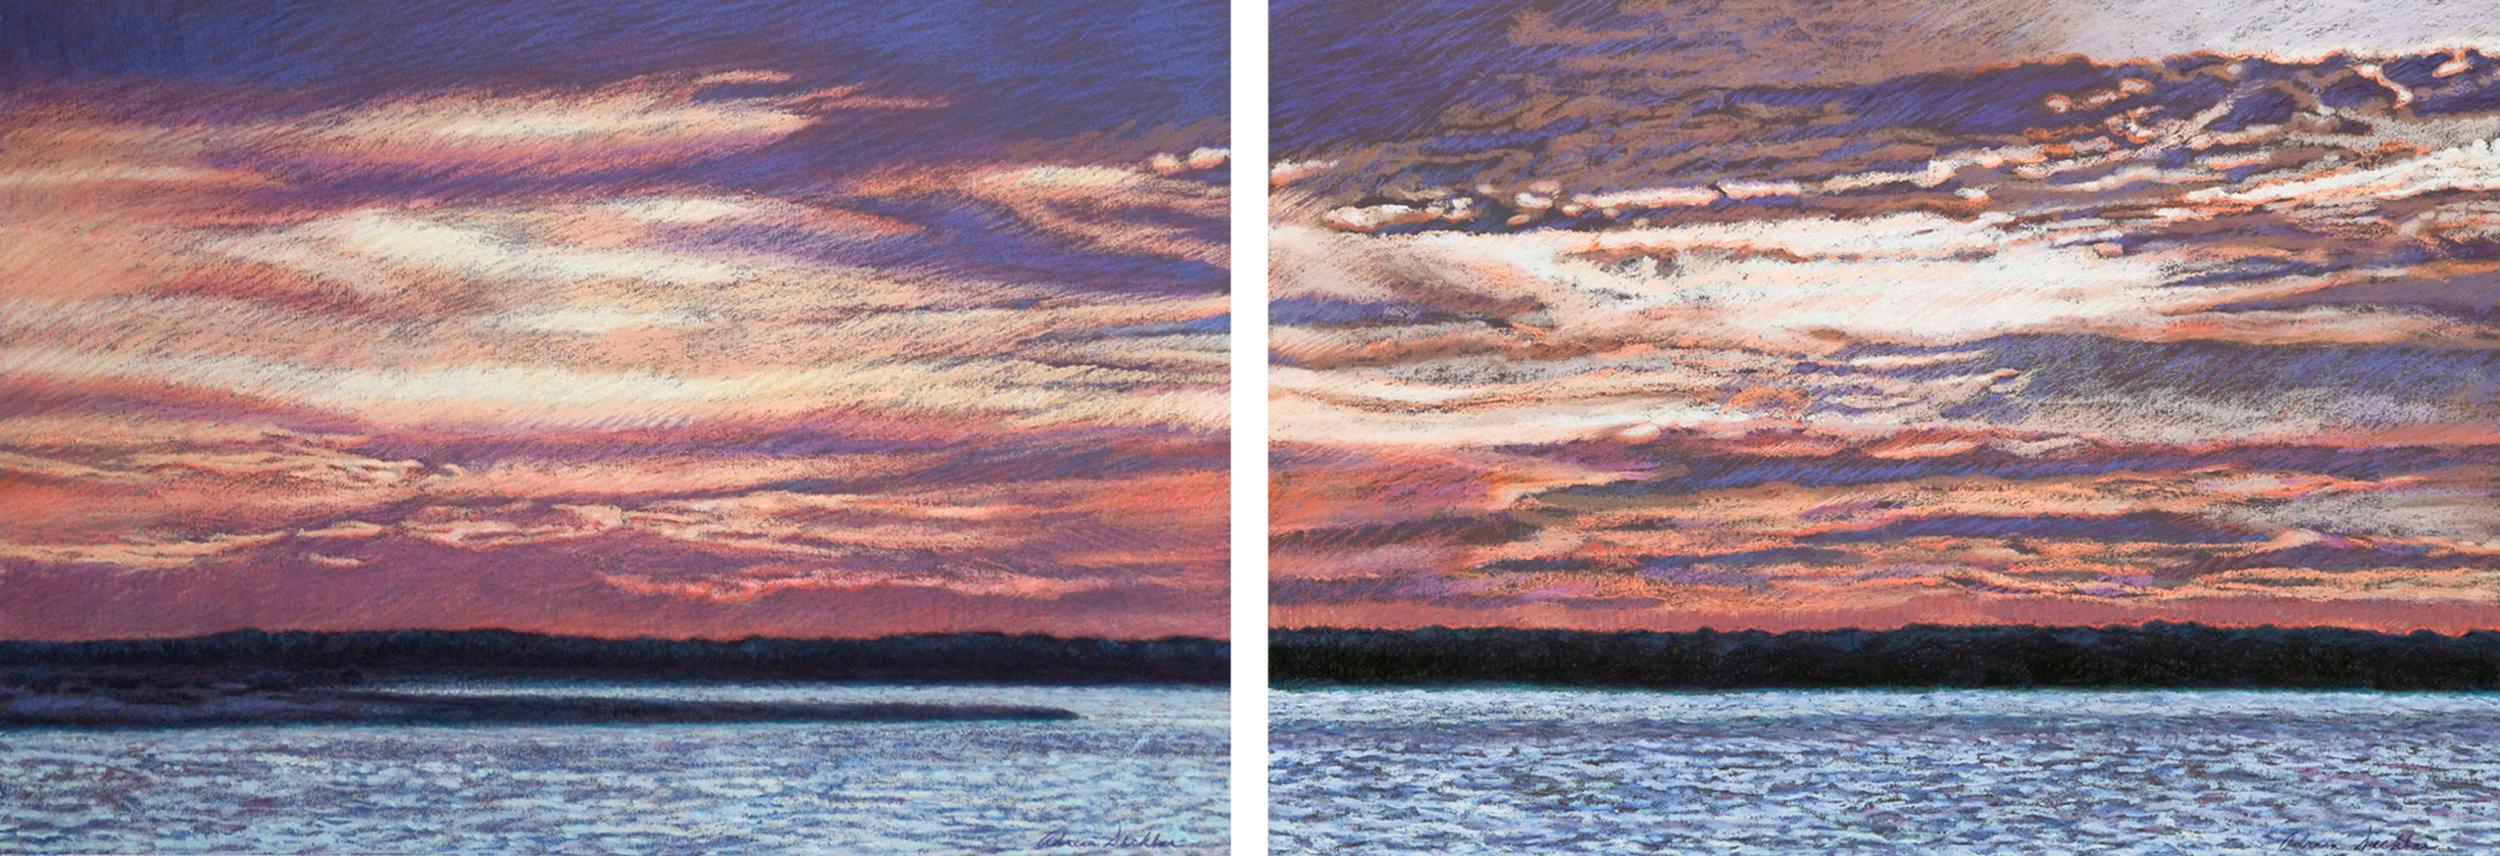 Adrian Deckbar Landscape Painting - Continuum I and II (diptych)